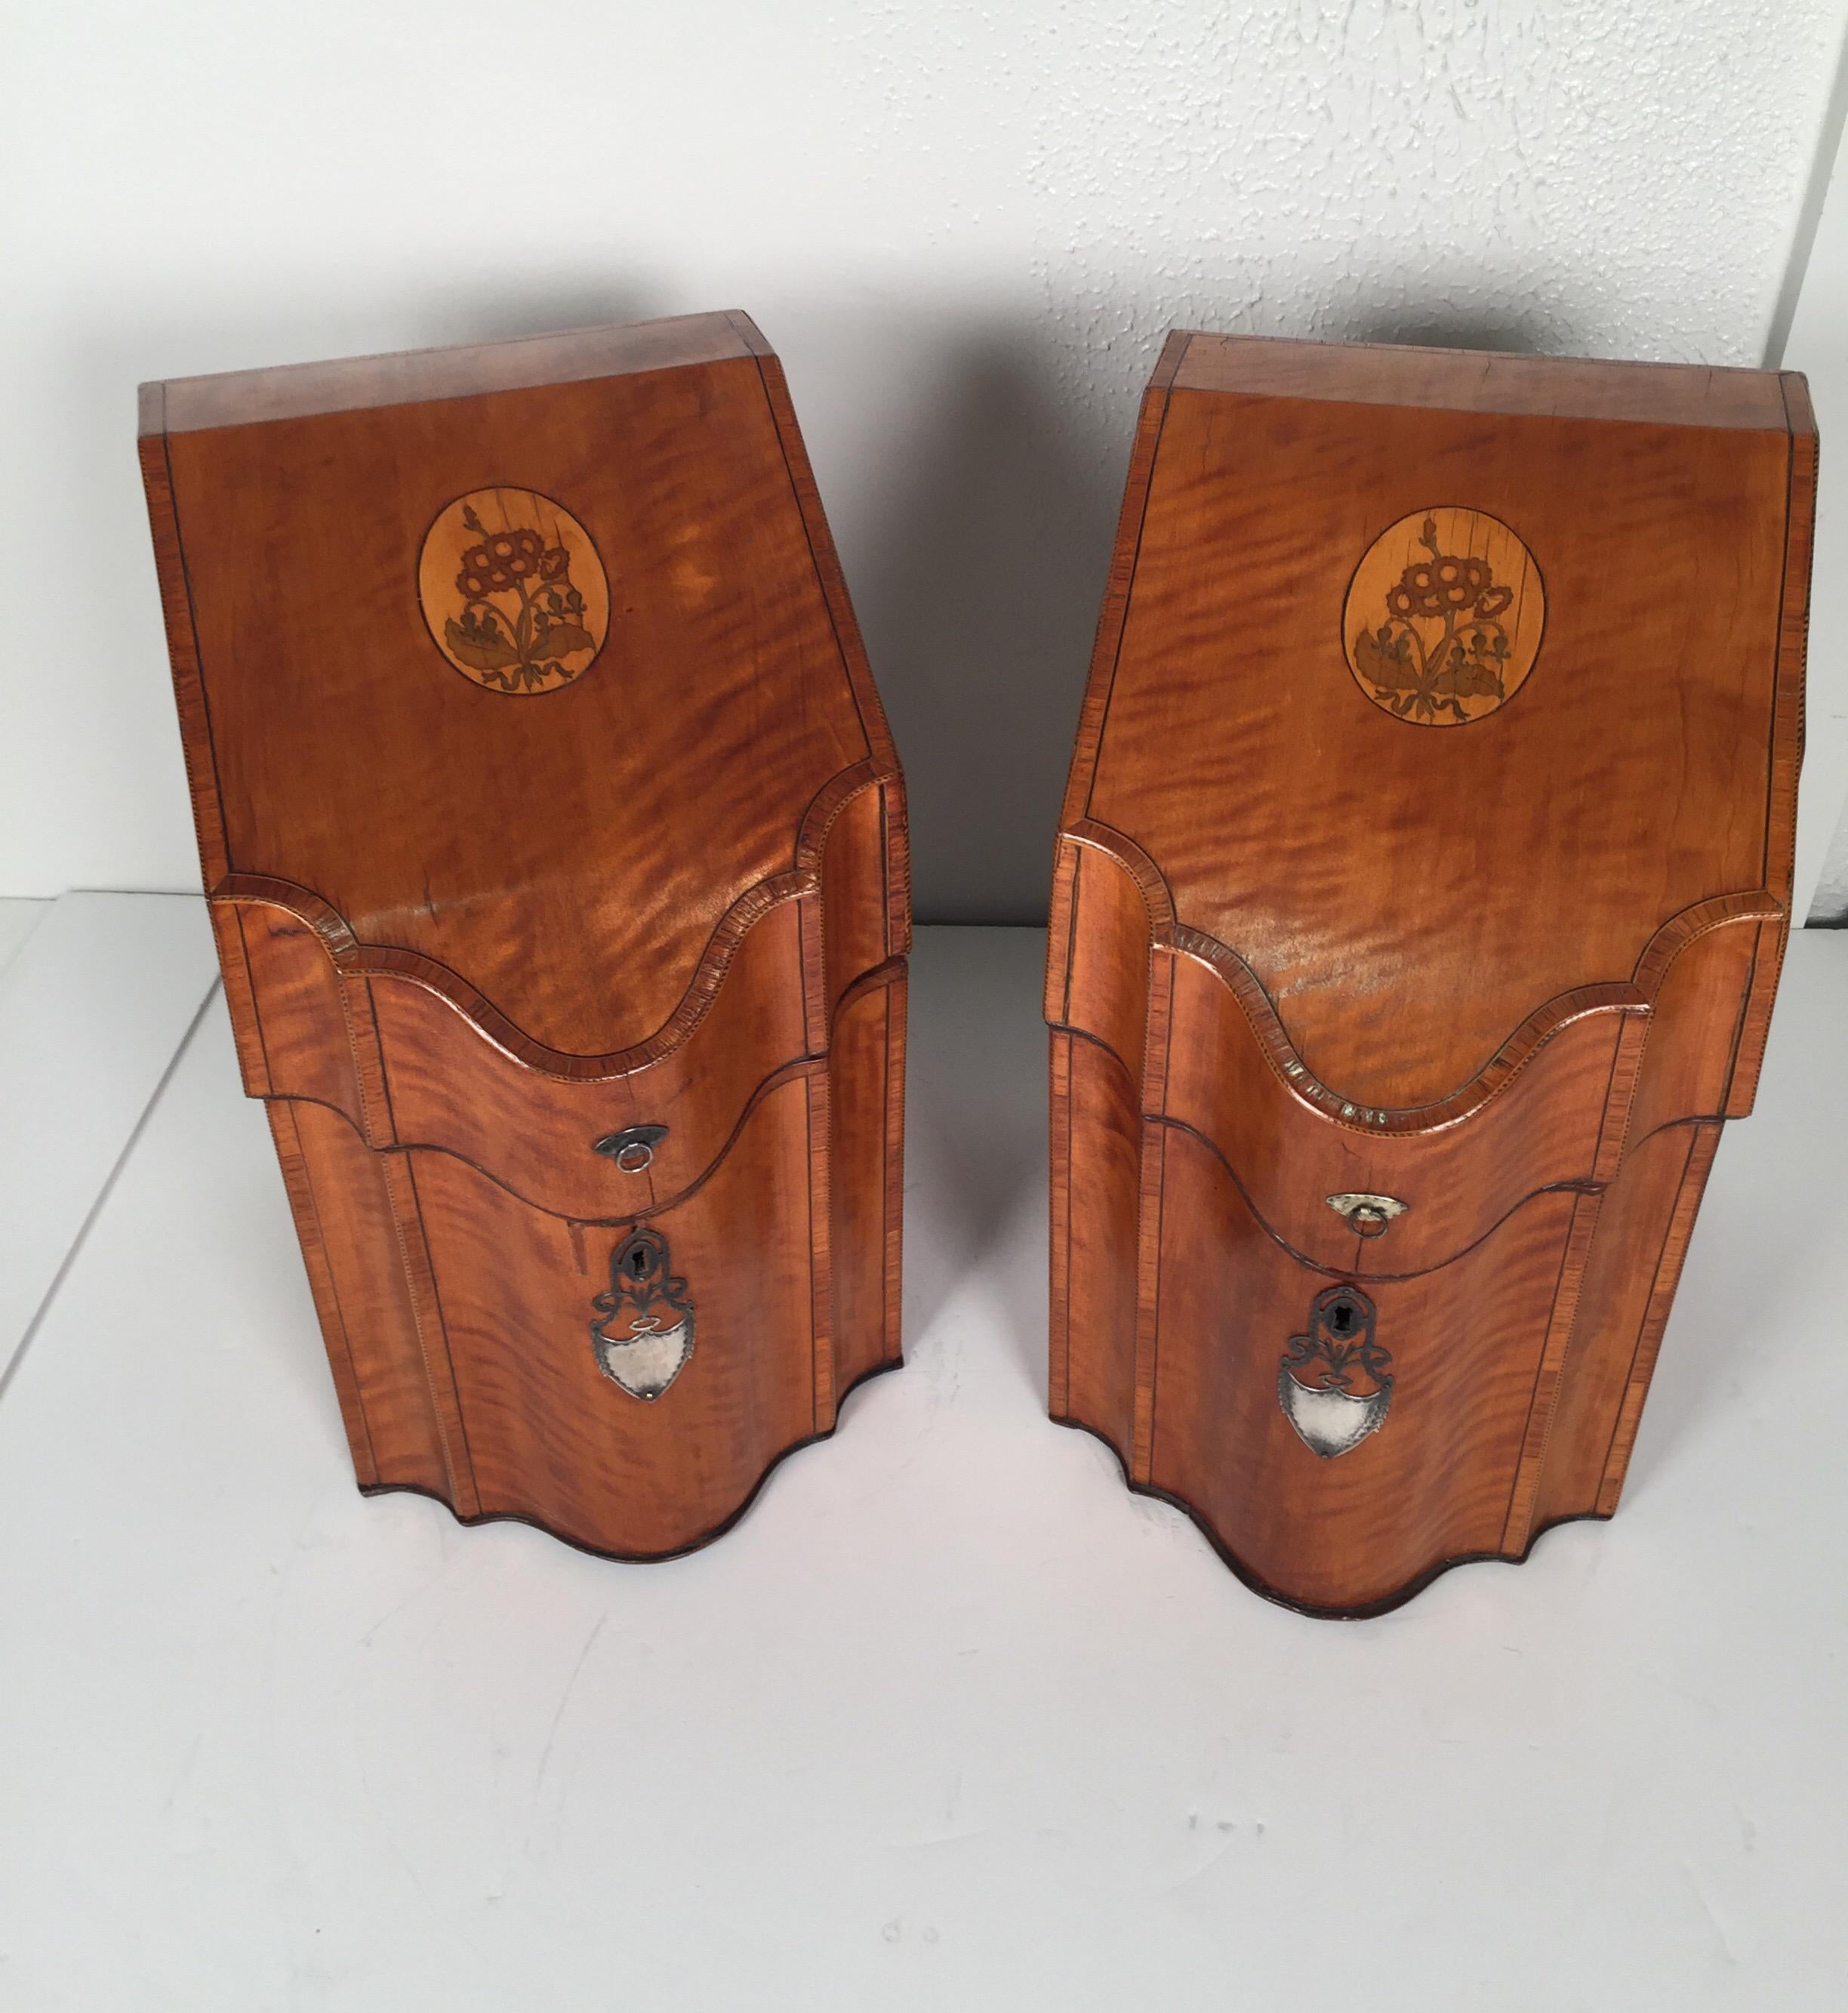 A pair of English satinwood knife boxes with sterling escutcheons. The tops open to reveal the original fittings. The original pair with serpentine fronts and sloped top. The boxes in very good condition with warping from age. No keys.